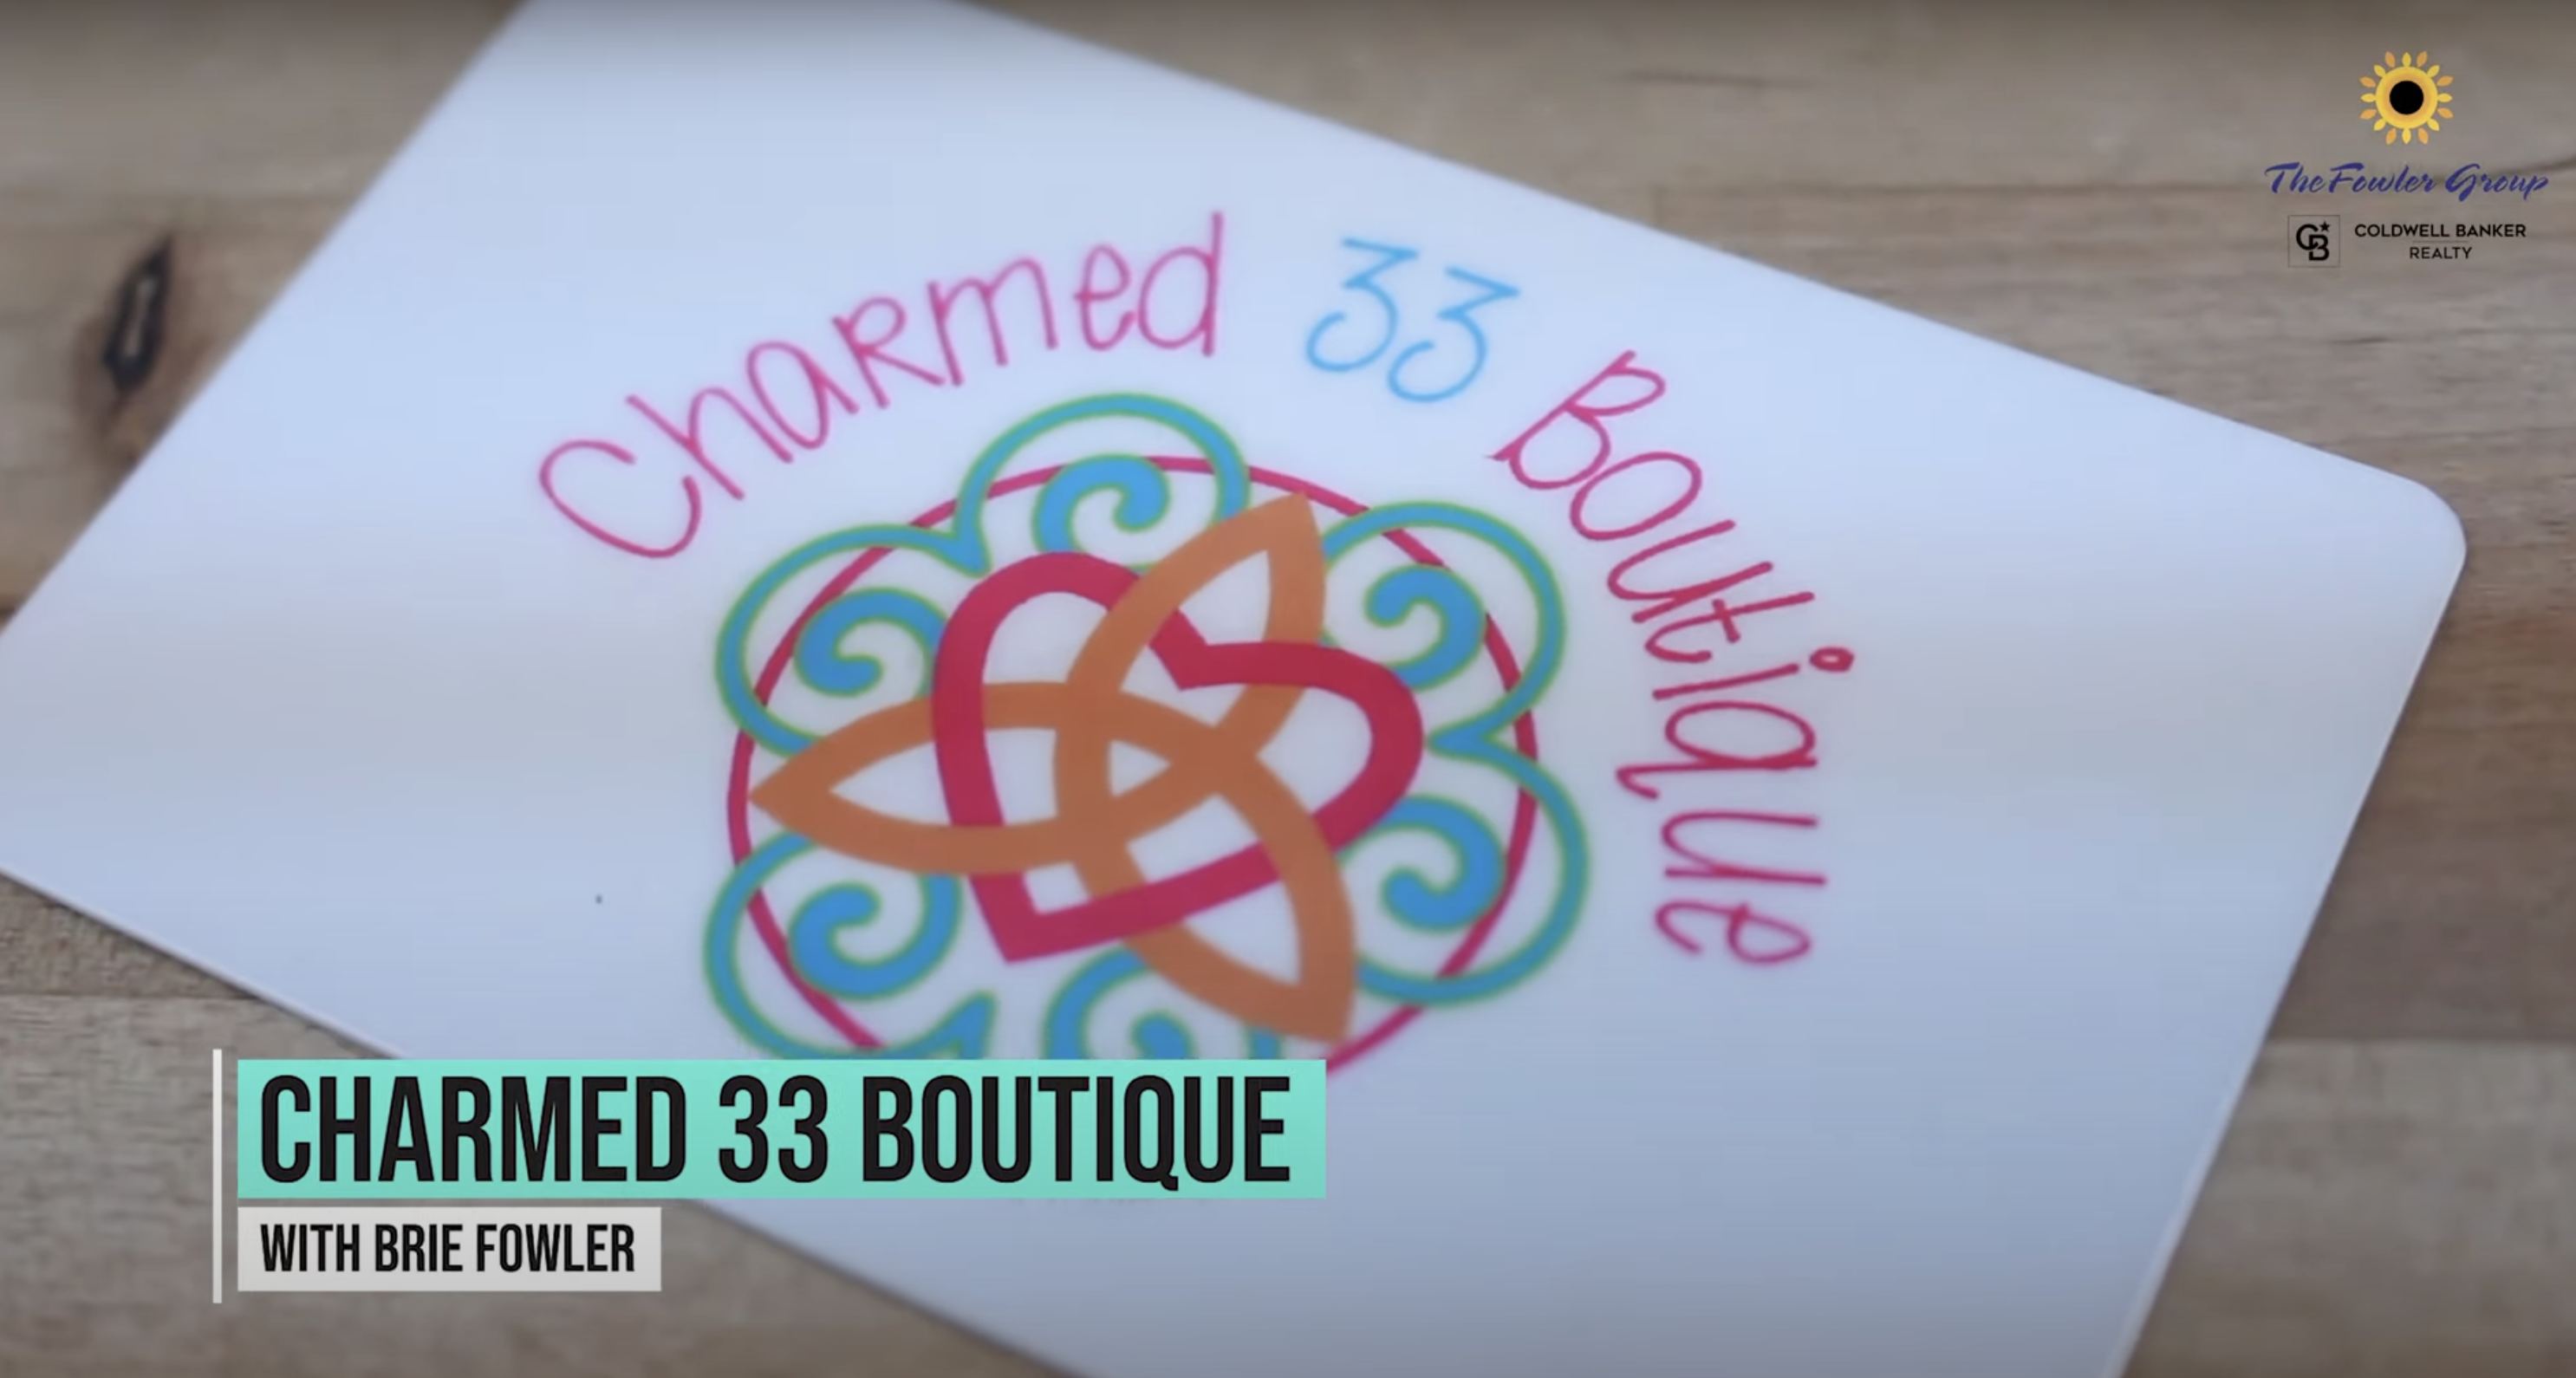 Experience Erie with Charmed 33 Boutique